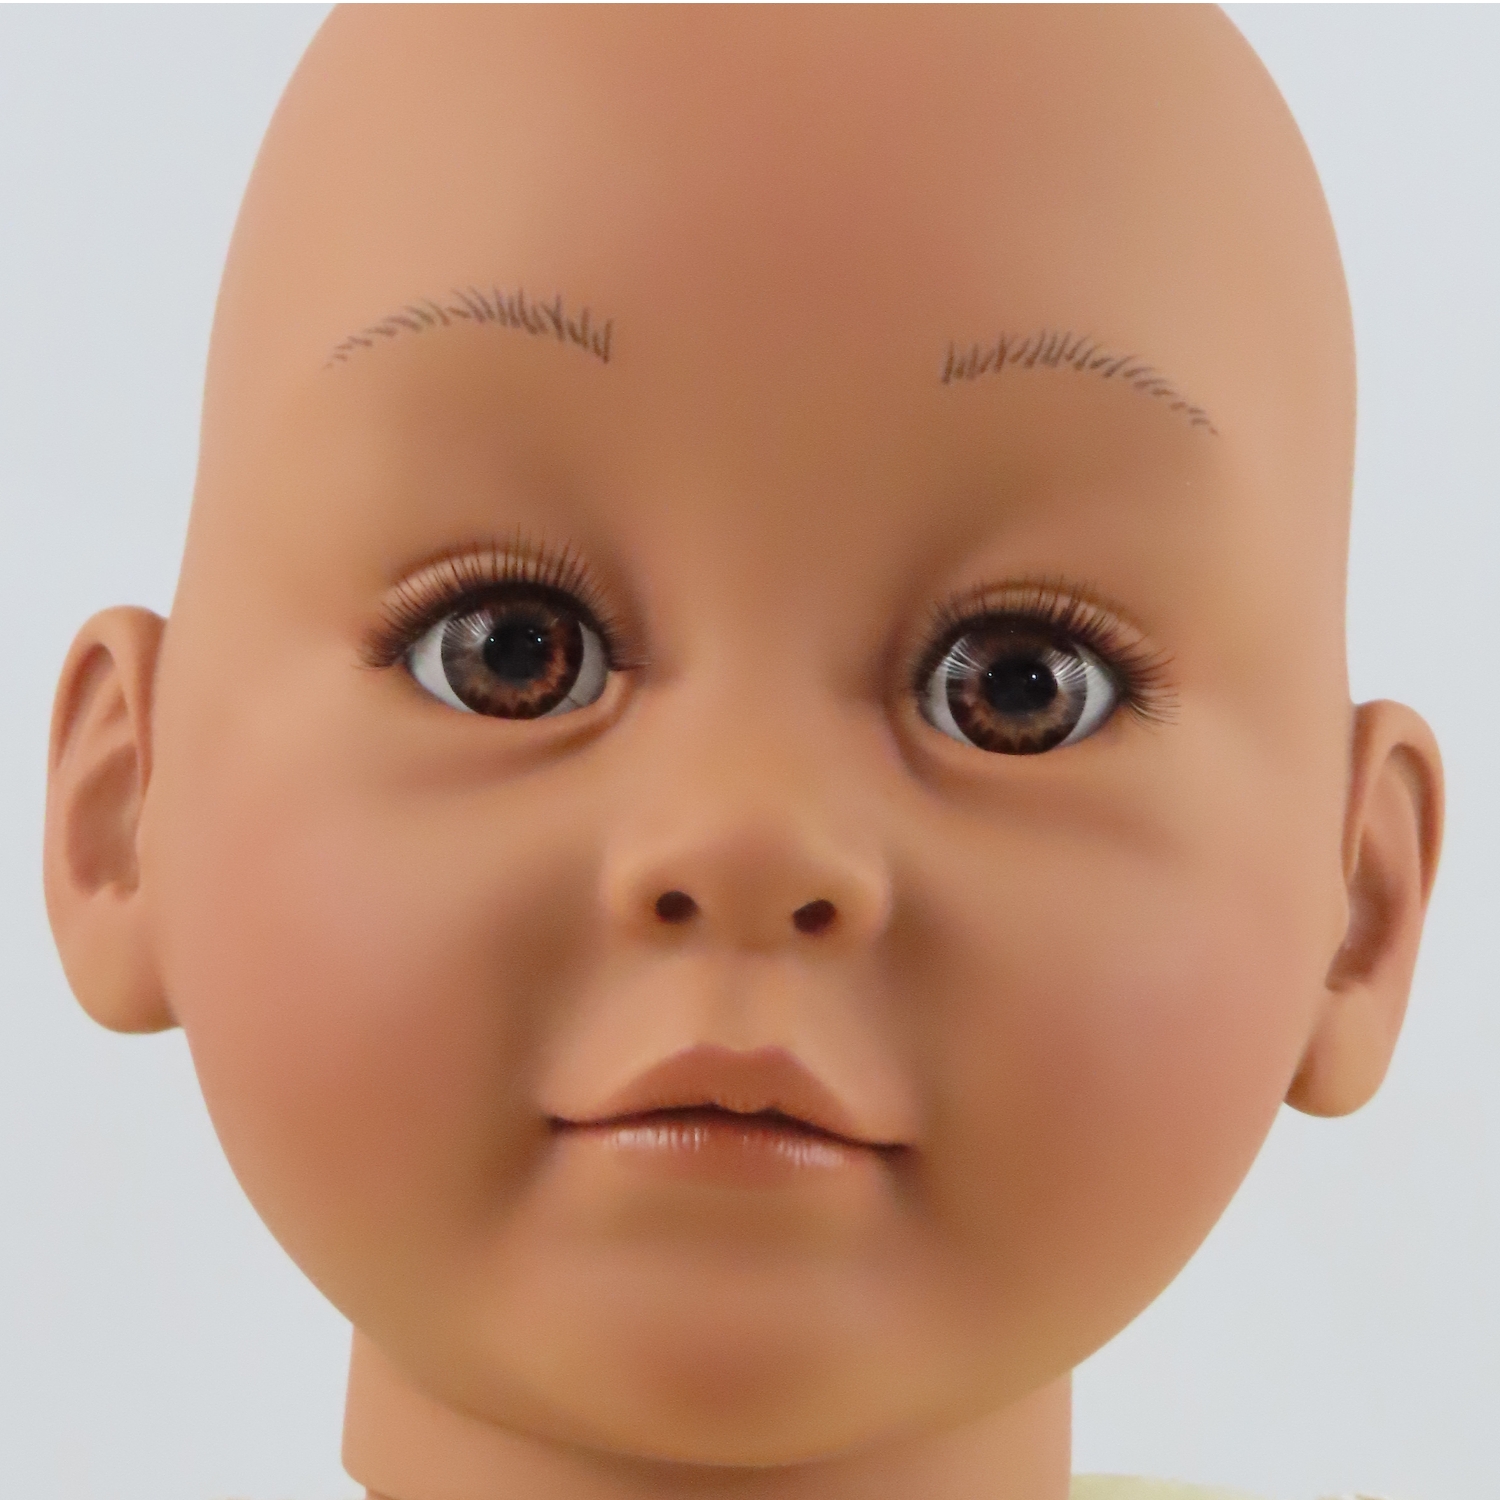 Tabitha Doll Kit for Creating Toddler and Baby Dolls That Look Real